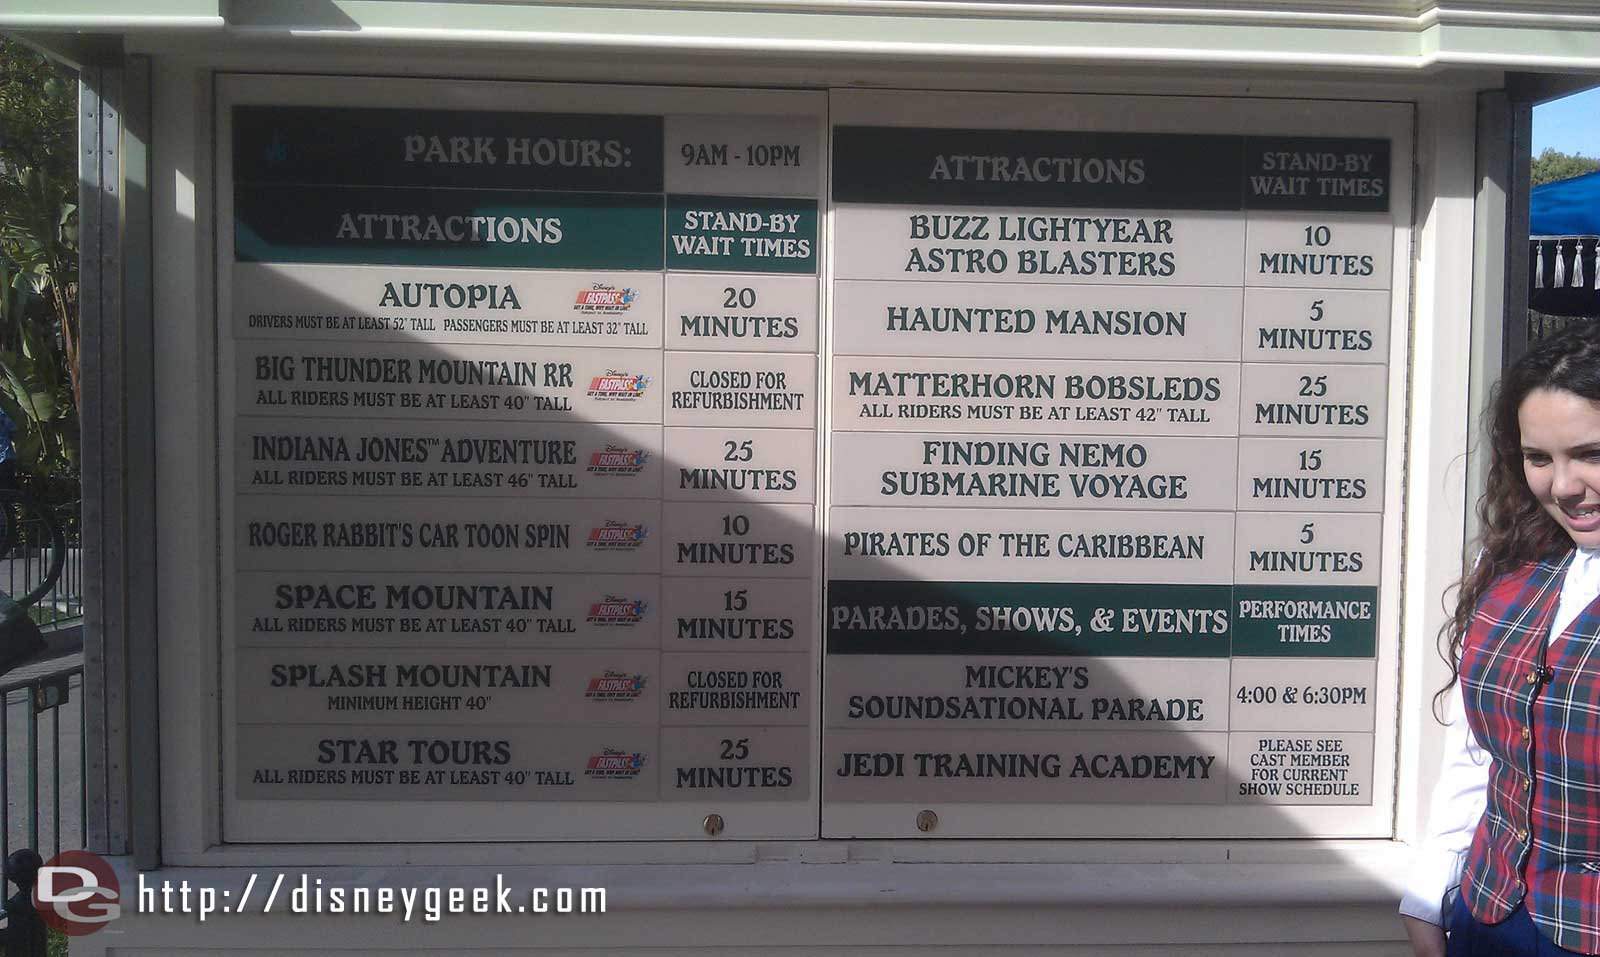 Current Disneyland wait times a nice quiet afternoon. Longest posted wait 25 min for Space Indy Matterhorn